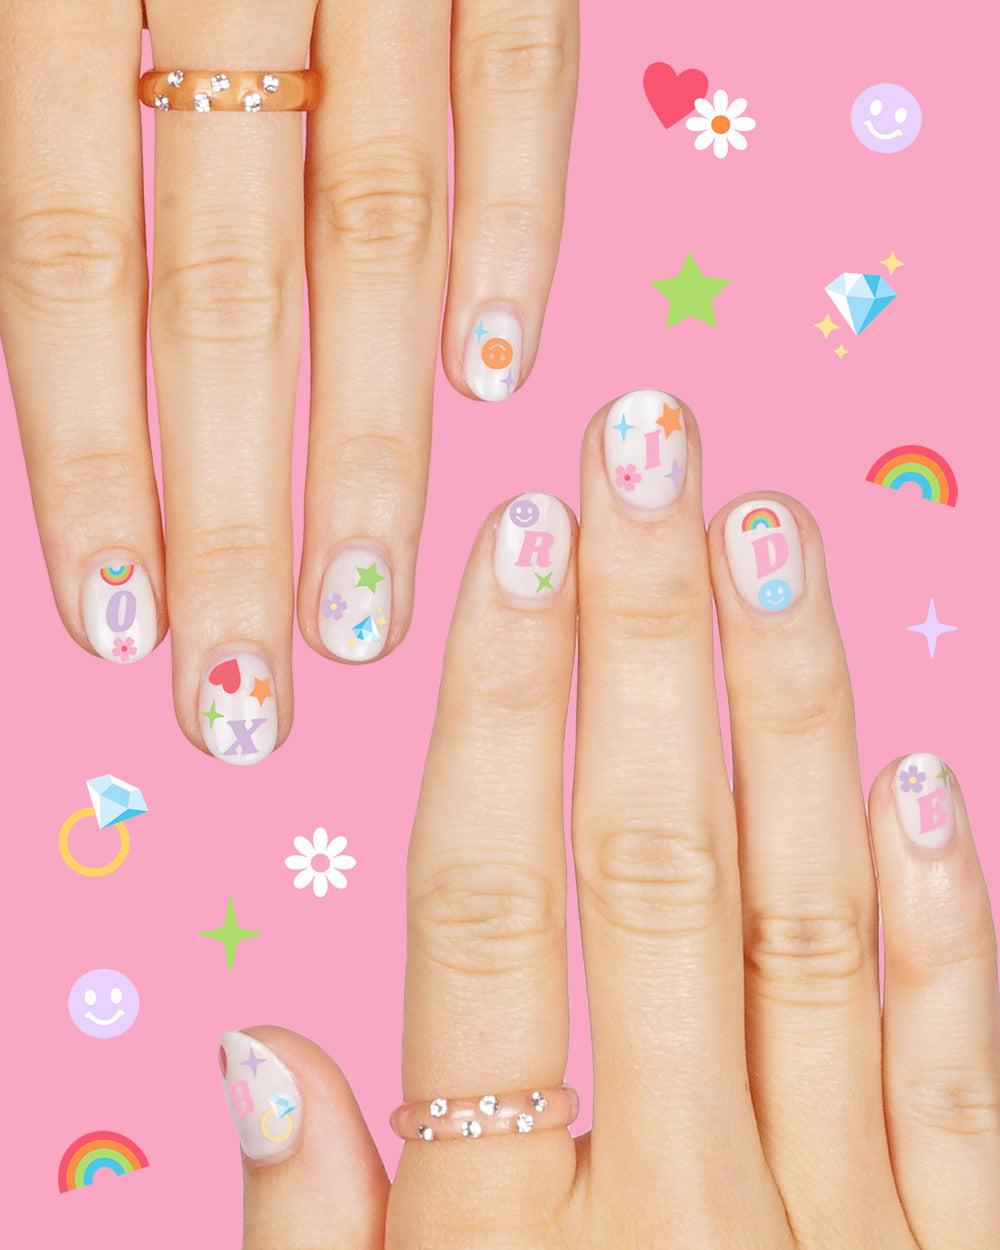 Bach'd Up Nail Stickers - 980 nail stickers